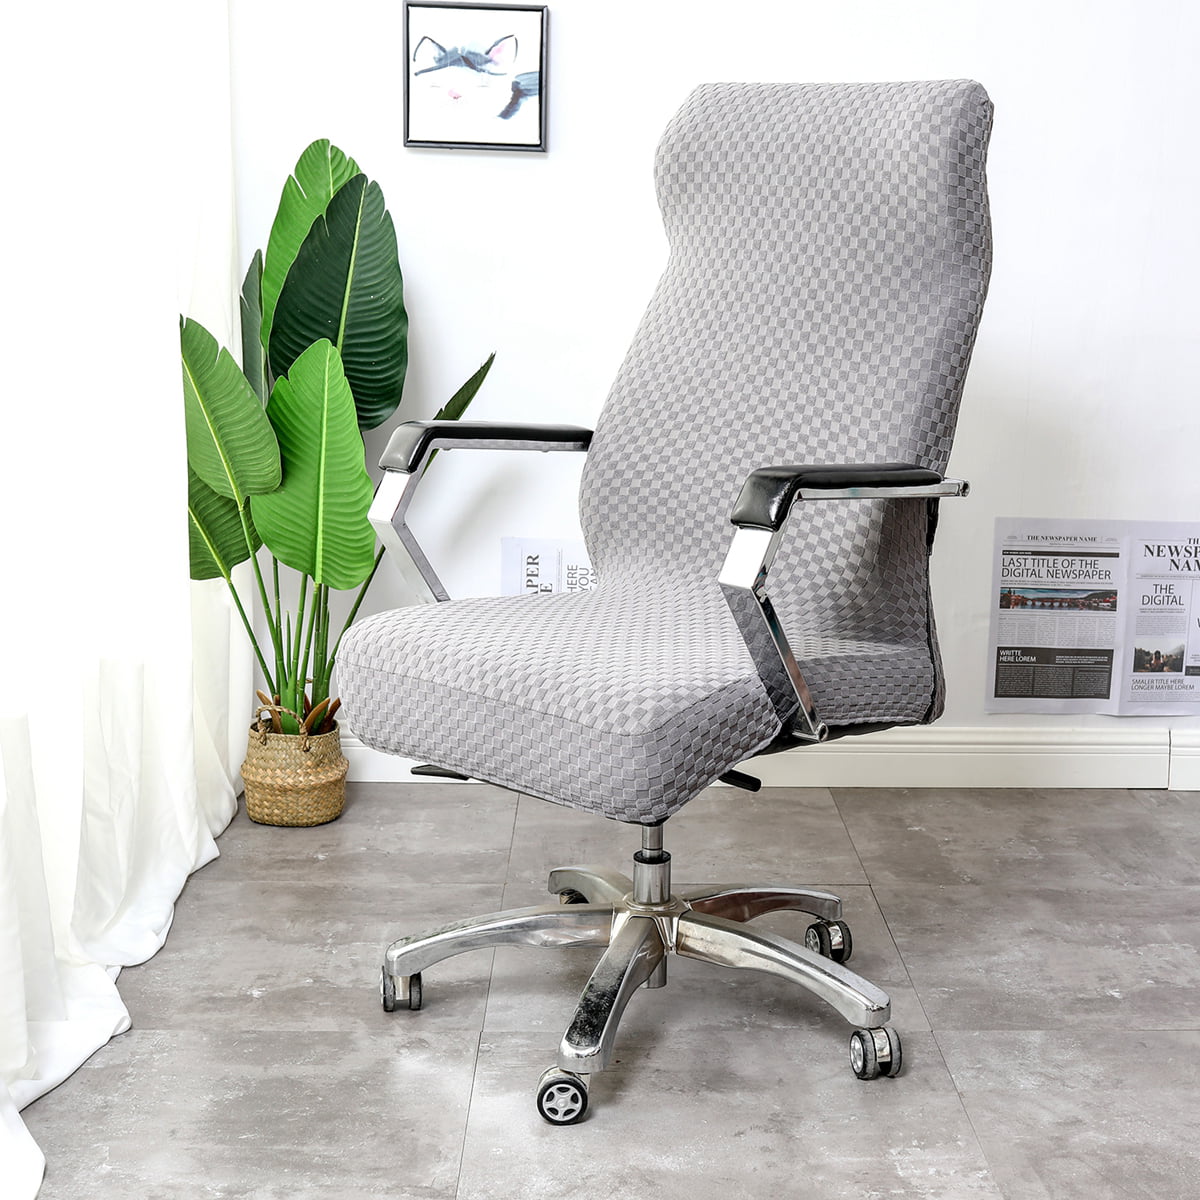 Removable Elastic Slipcover Office Computer Chair Seat Cover Protector Grey 